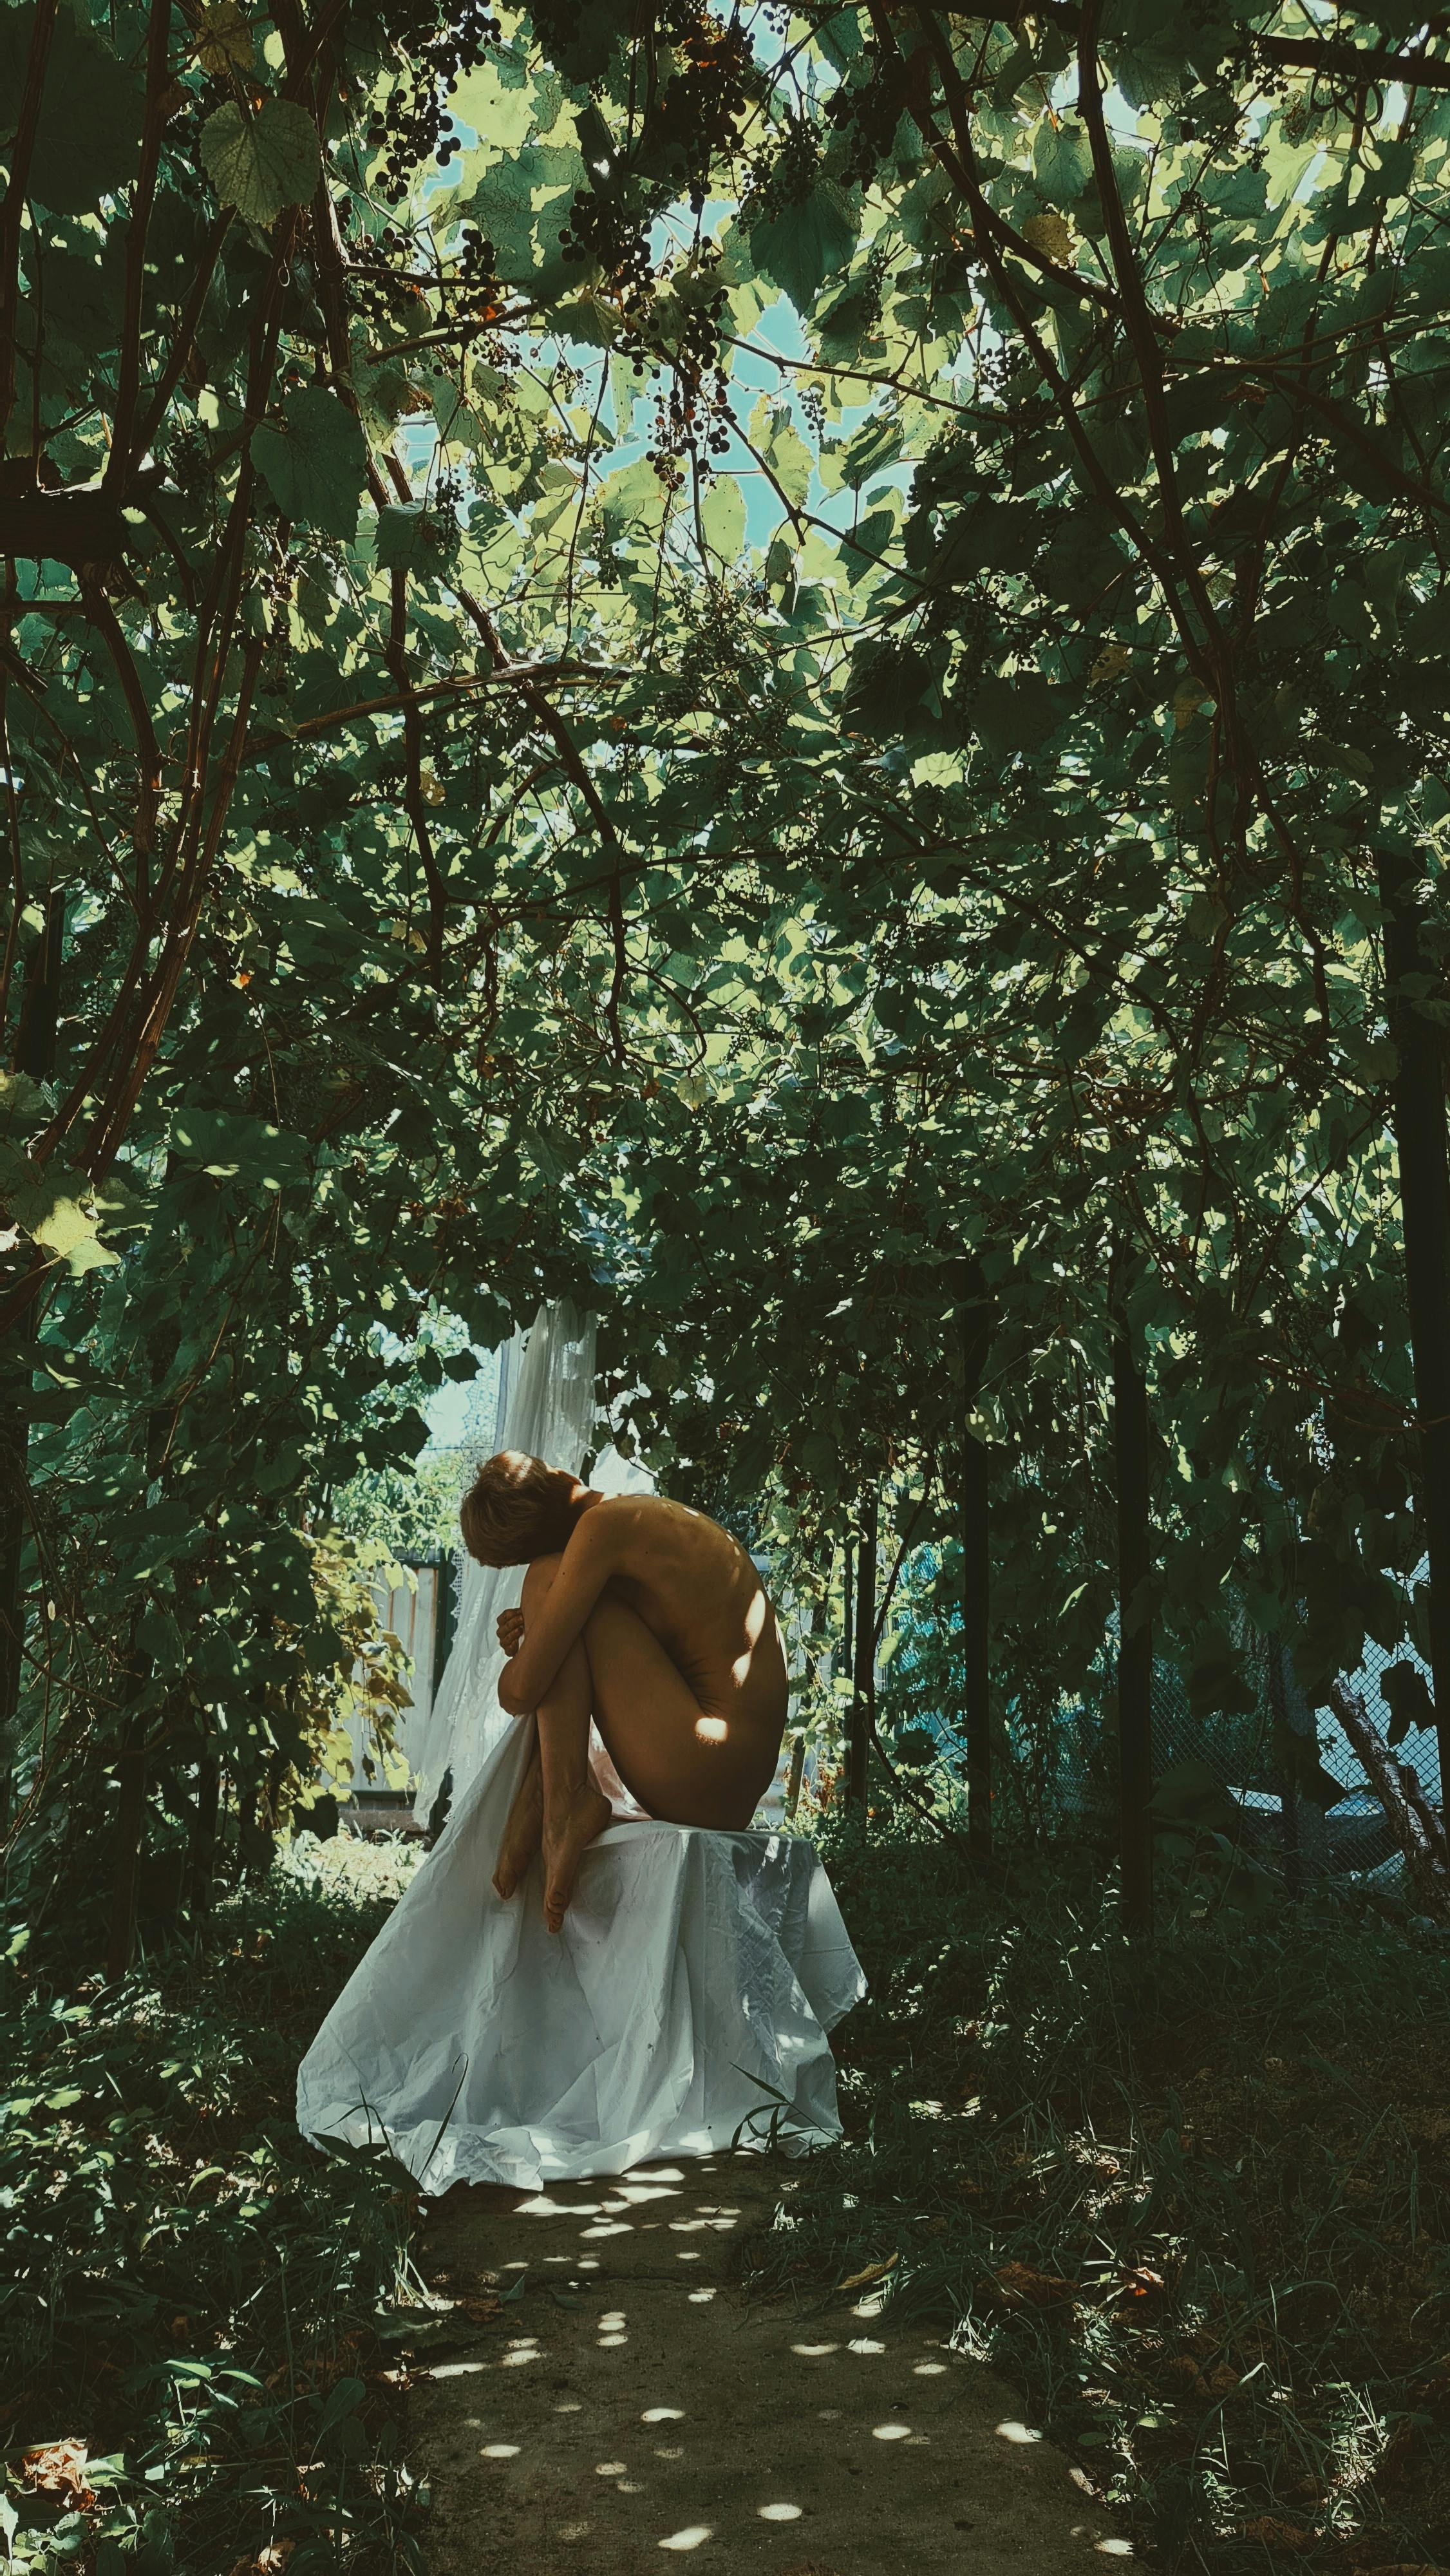 a naked person sitting on a white cloth near the green trees